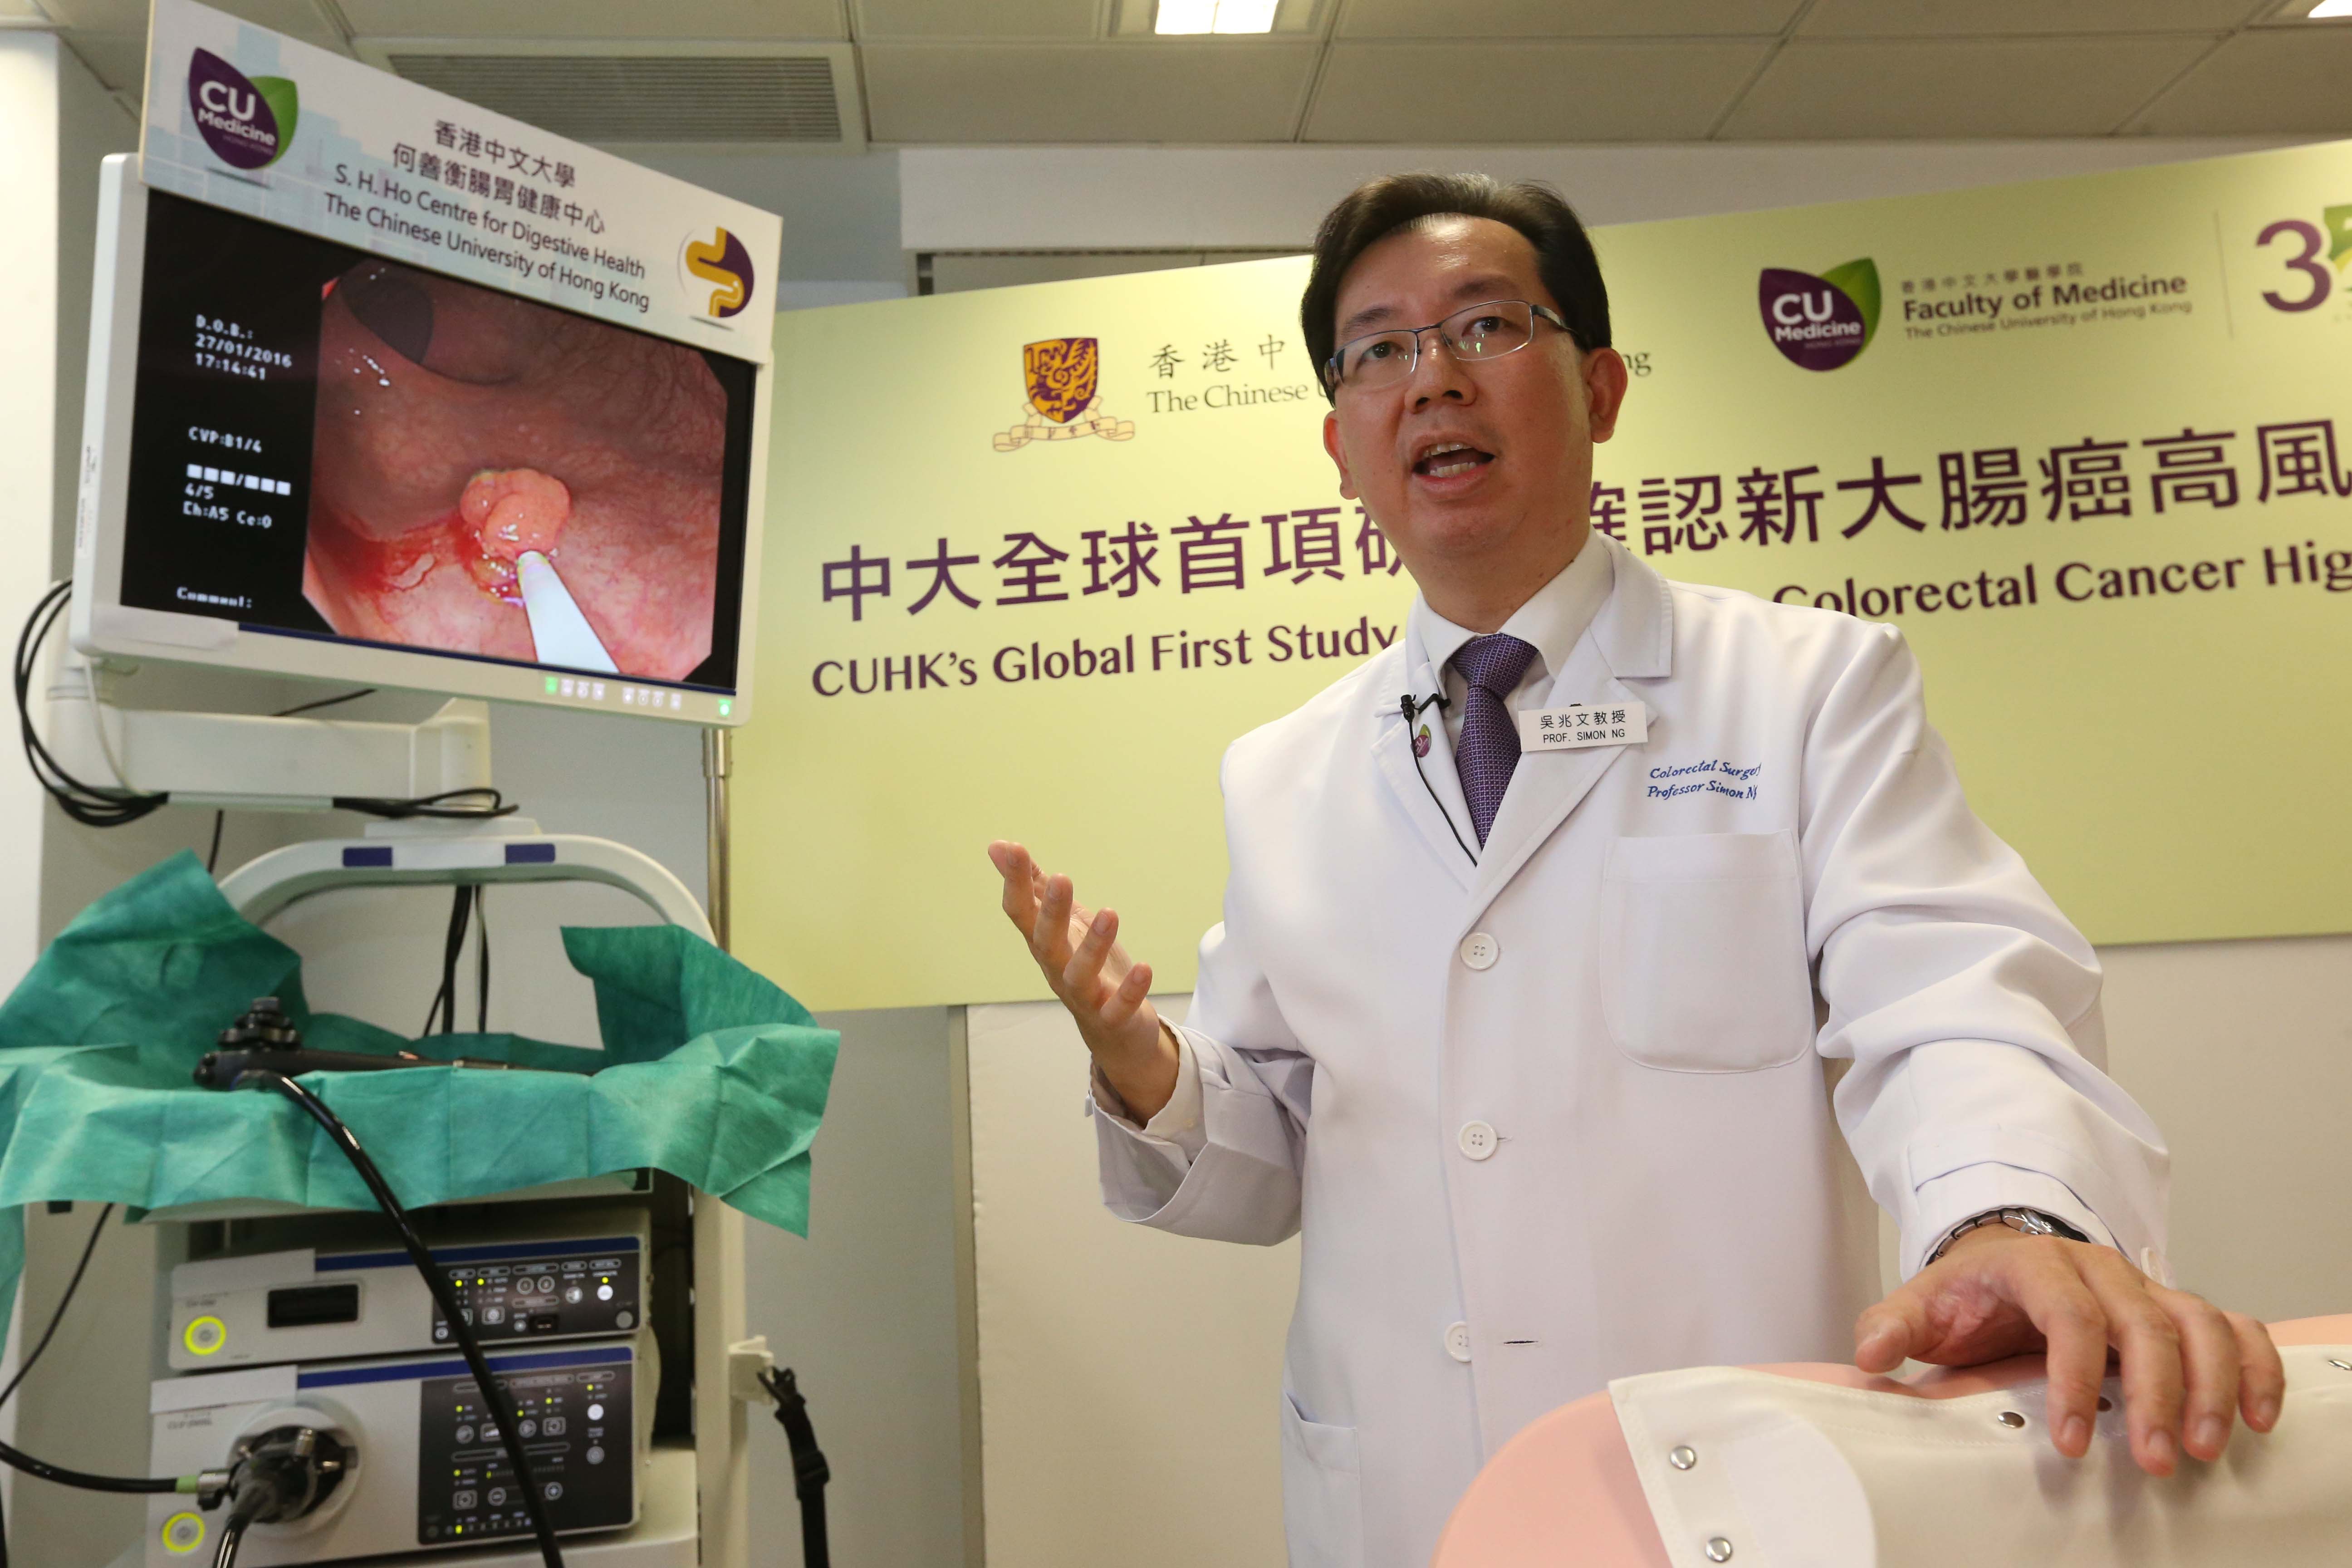 Prof. Simon NG states that if the polyps could be discovered